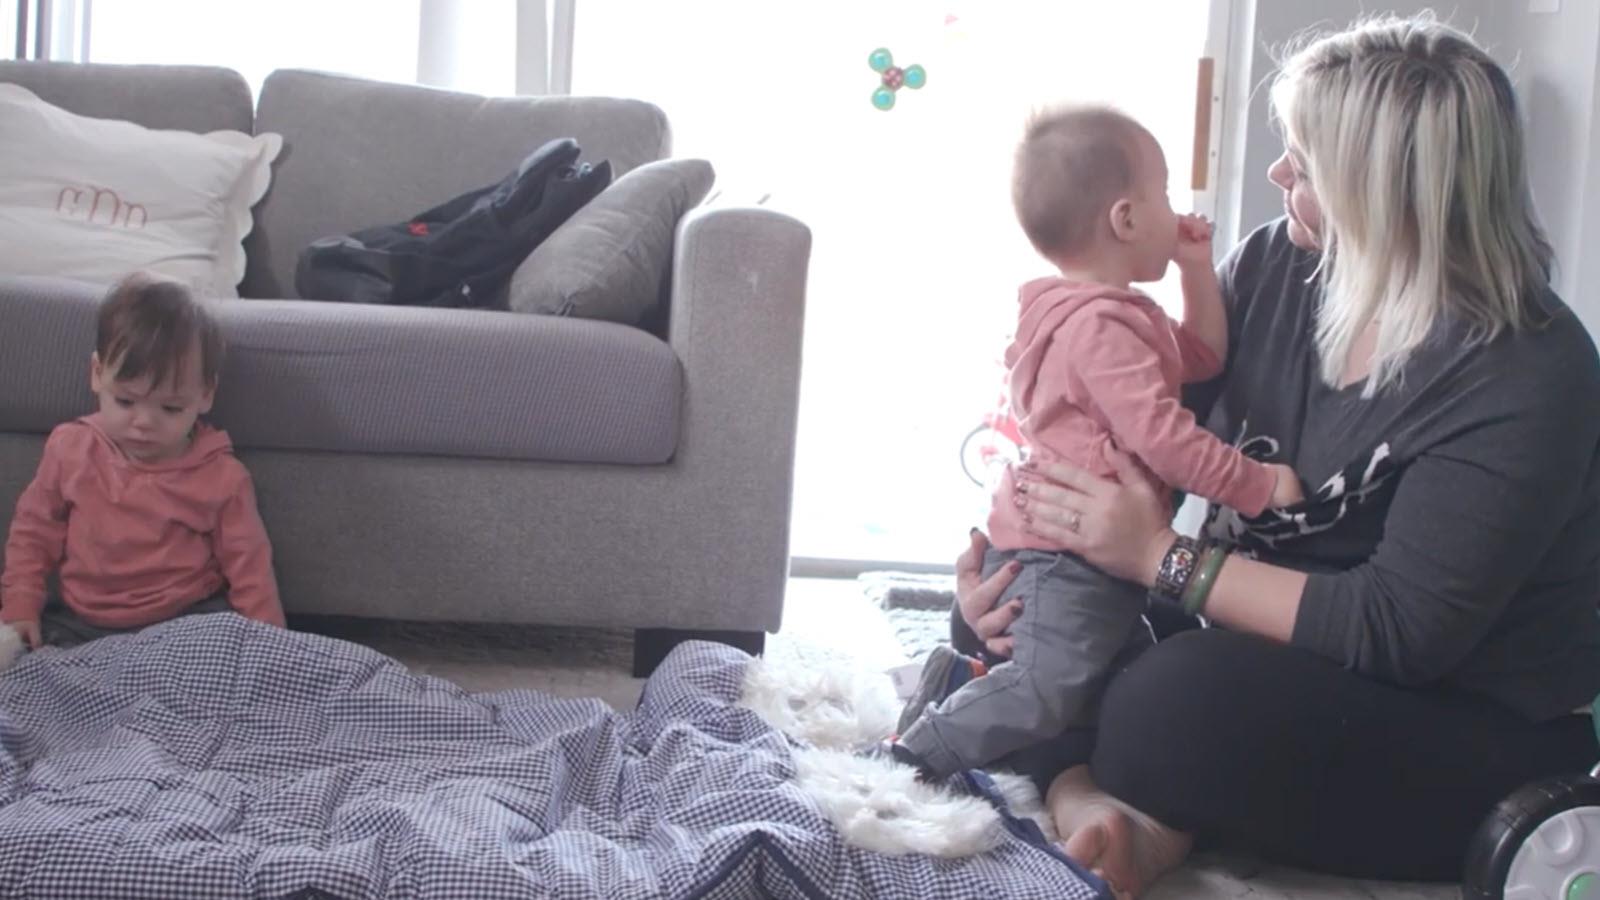 Danielle, a primary immunodeficiency patient, at home with her twin boys